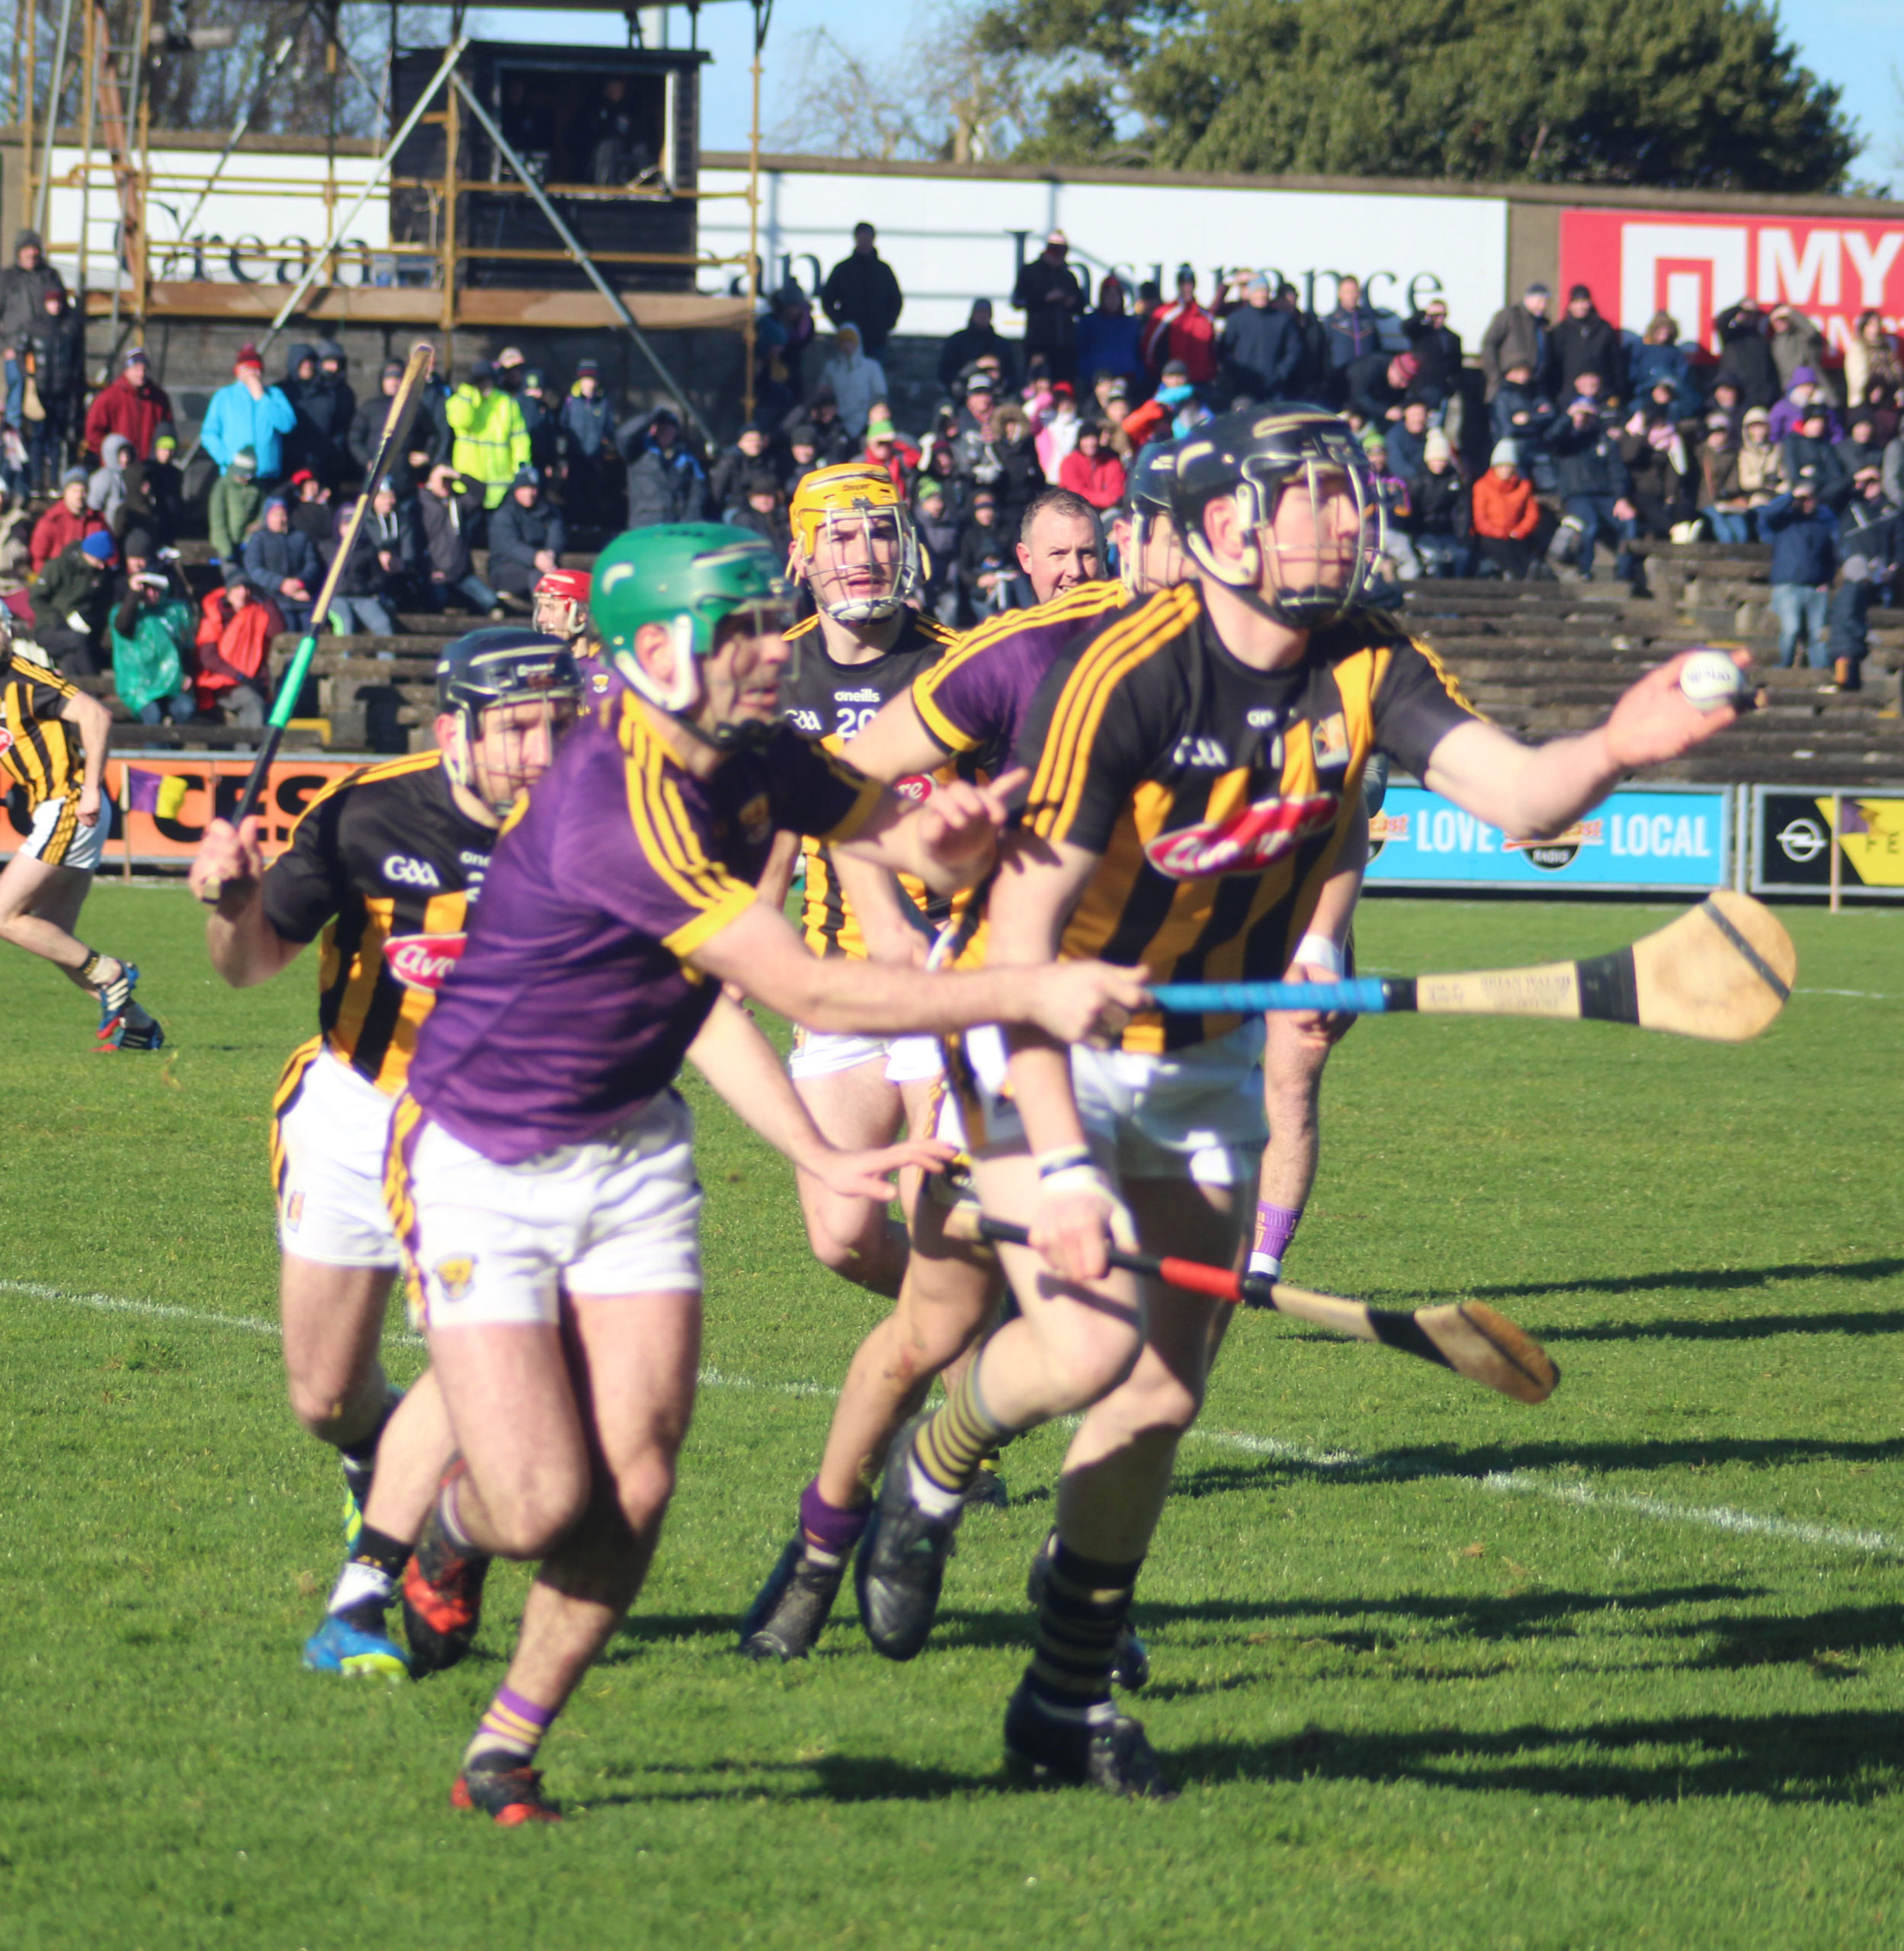 Walsh Cup, Round 3 – Kilkenny vs Wexford